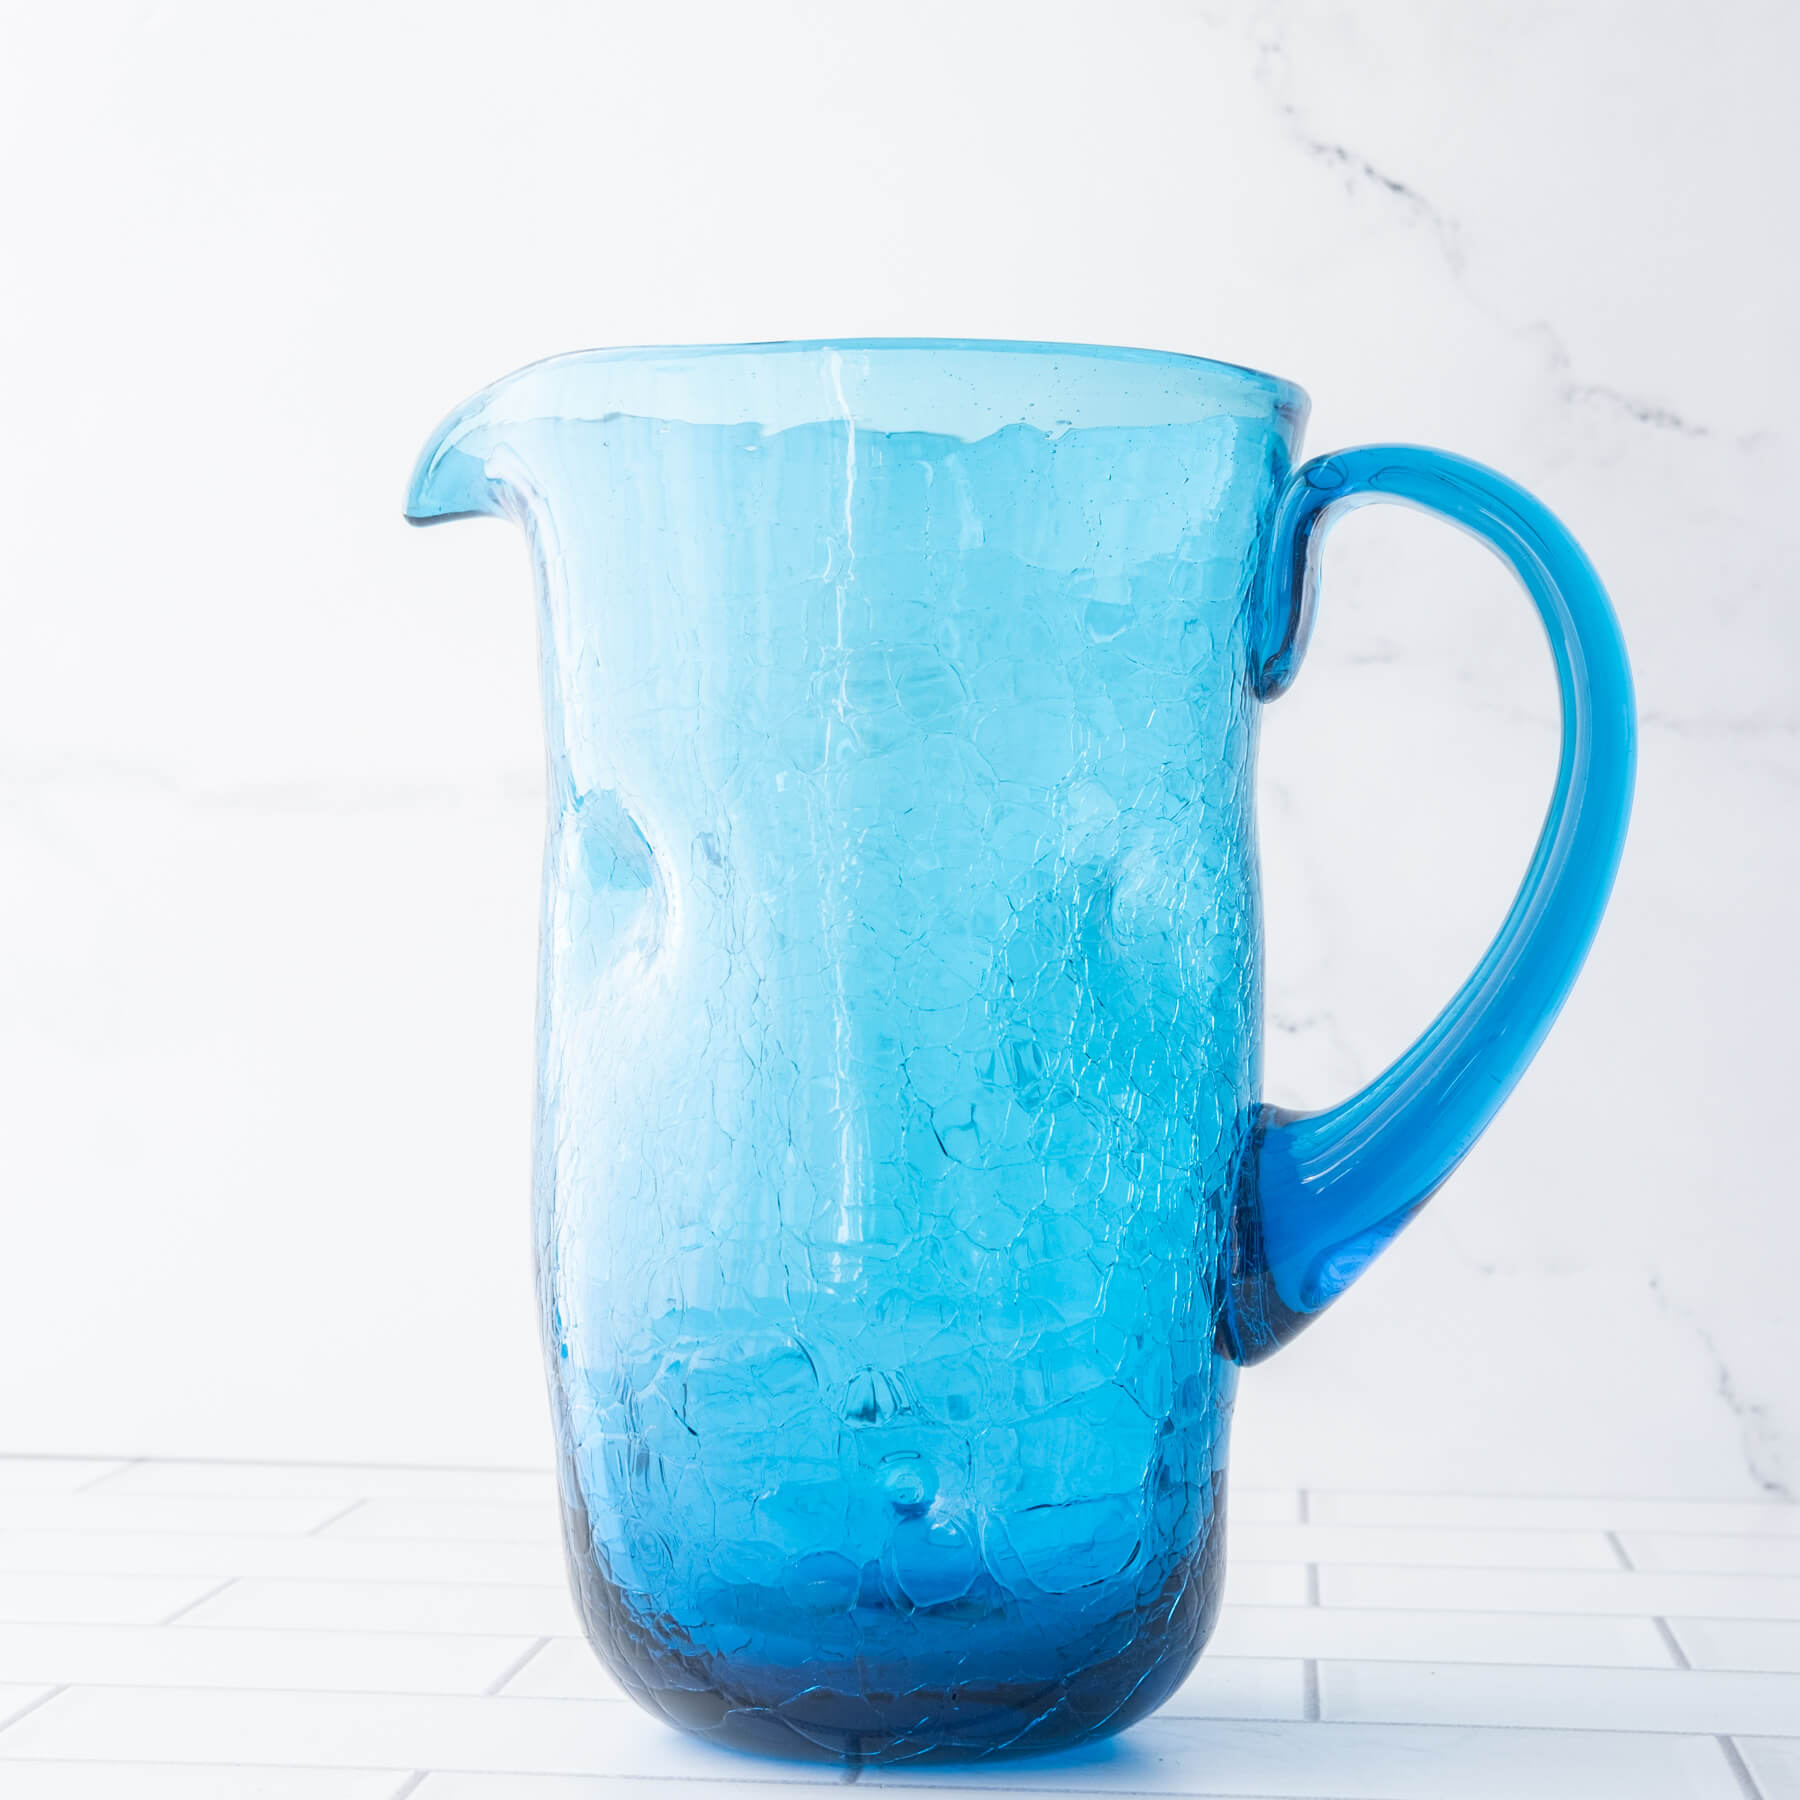 7018 Crackled Dimple Pitcher - Turquoise